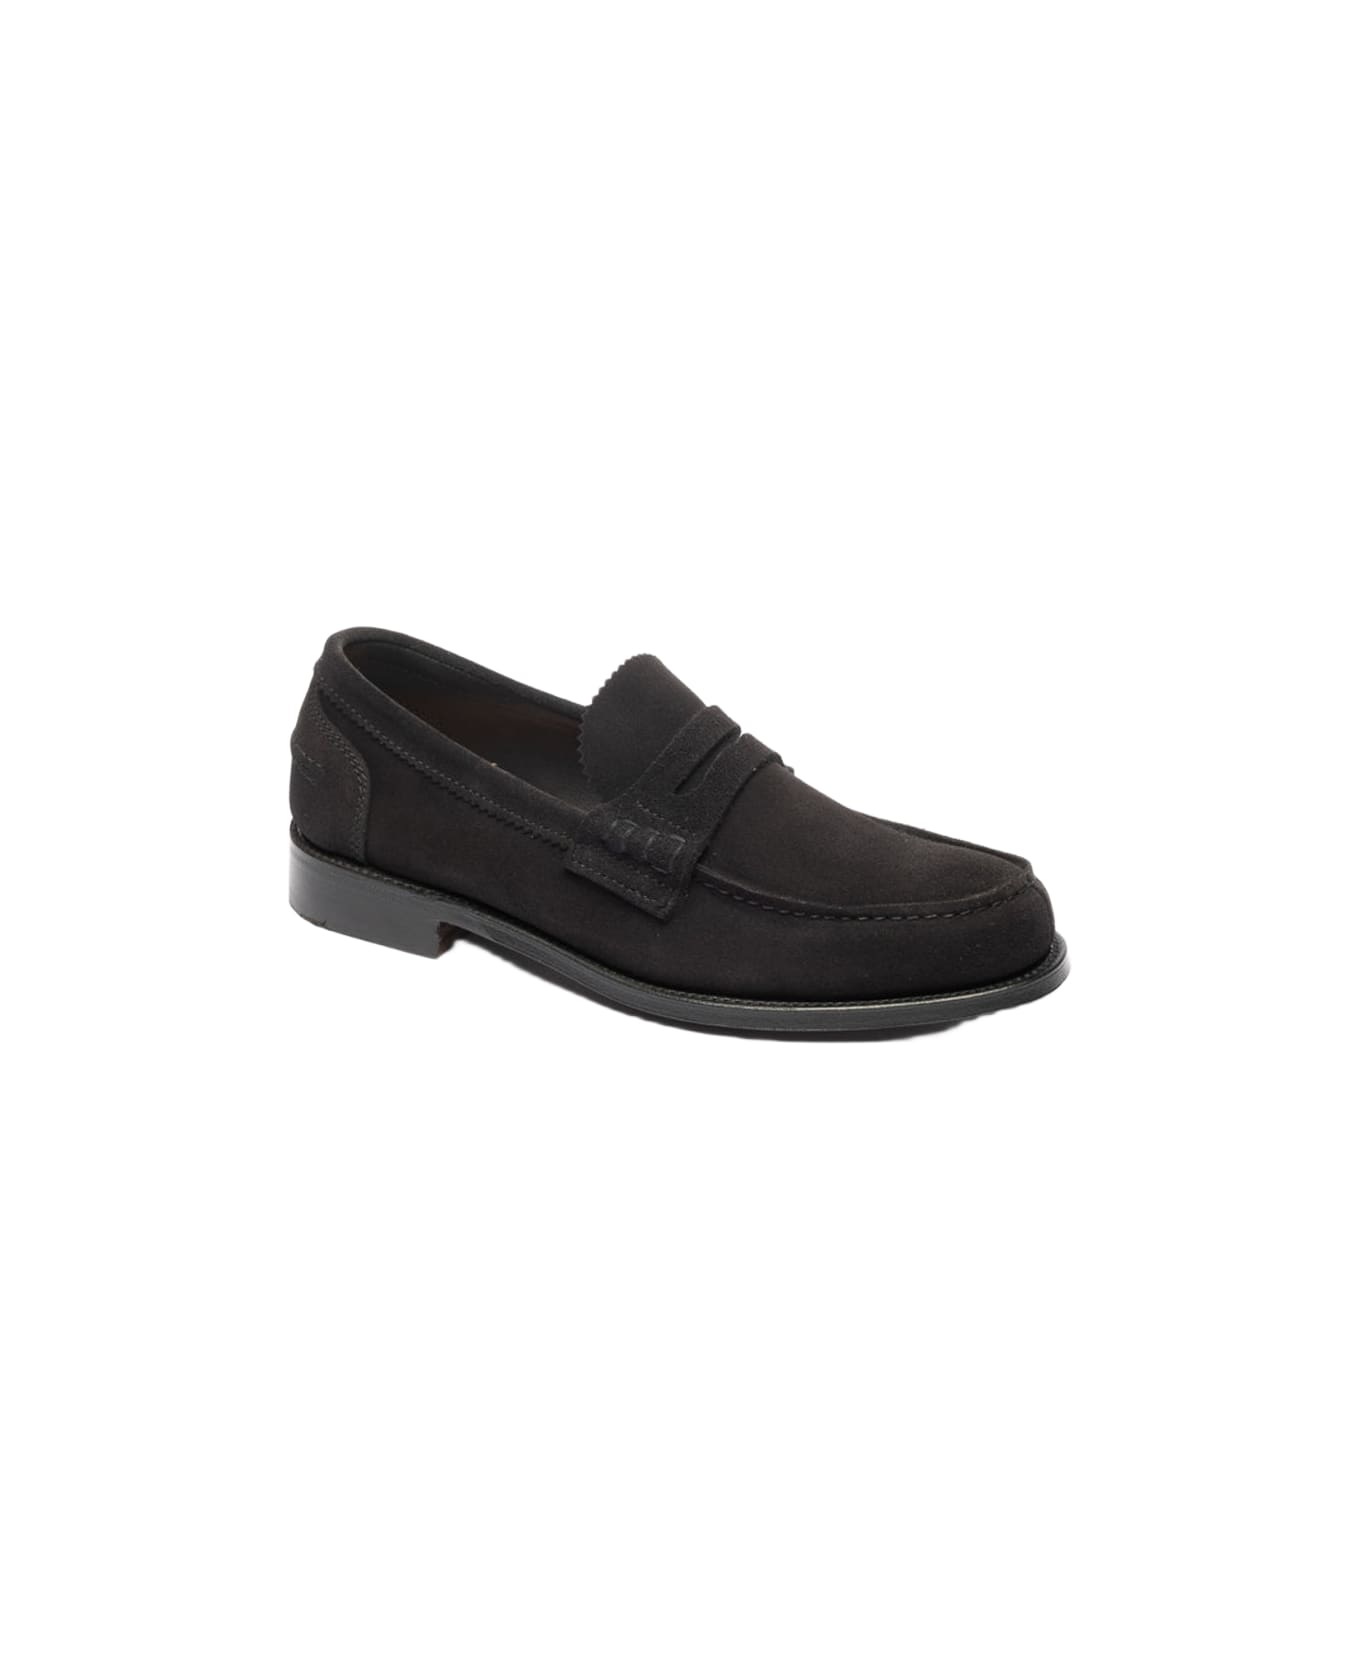 Cheaney Black Suede Penny Loafer - Nero